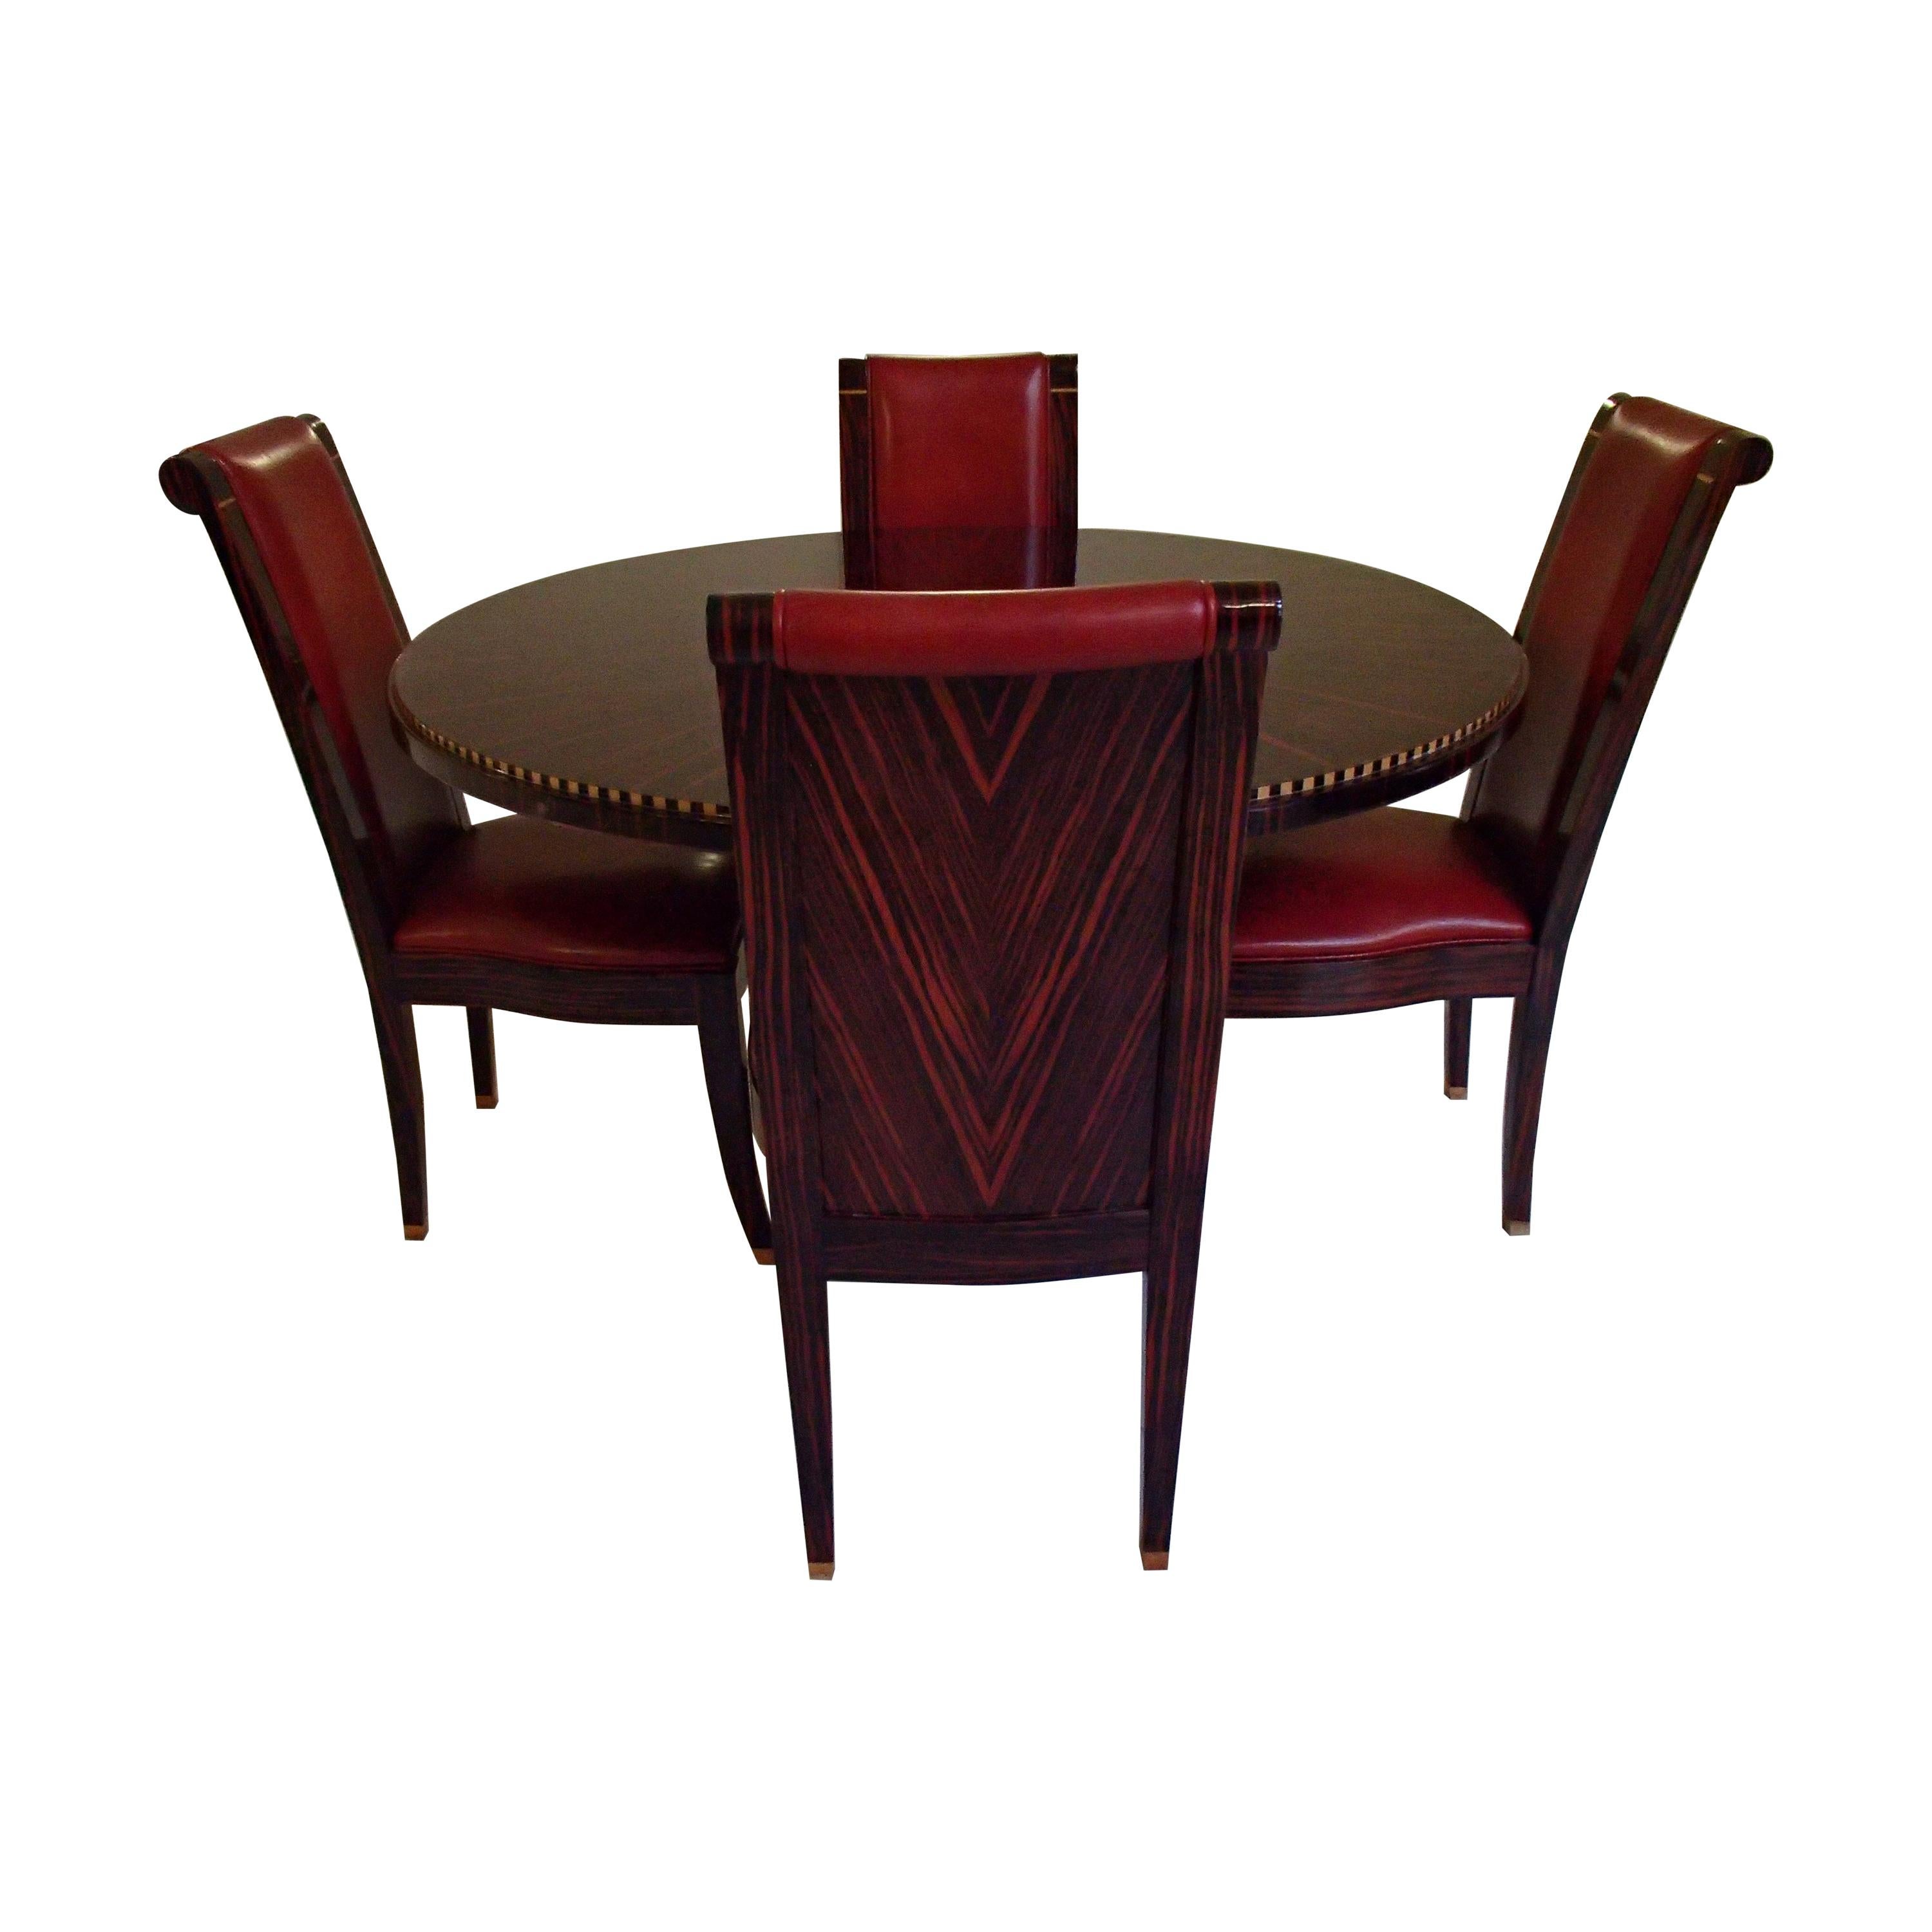 Round Art Deco Table with 4 Red Leather Chairs For Sale